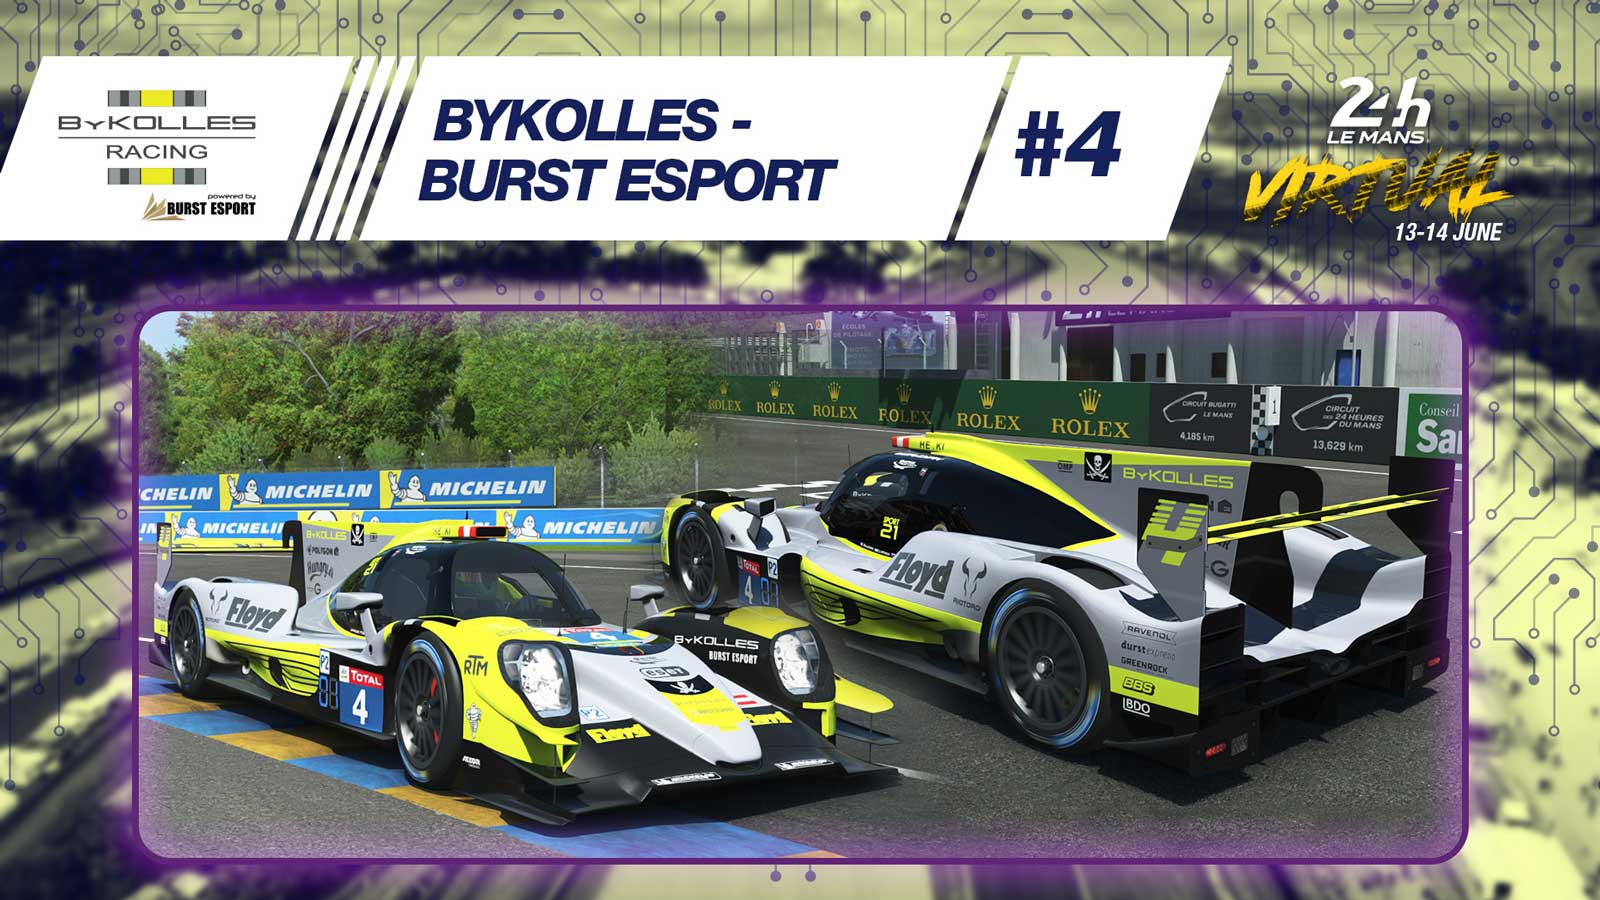 ByKolles – Burst Esport has revealed the livery for #LeMans24Virtual